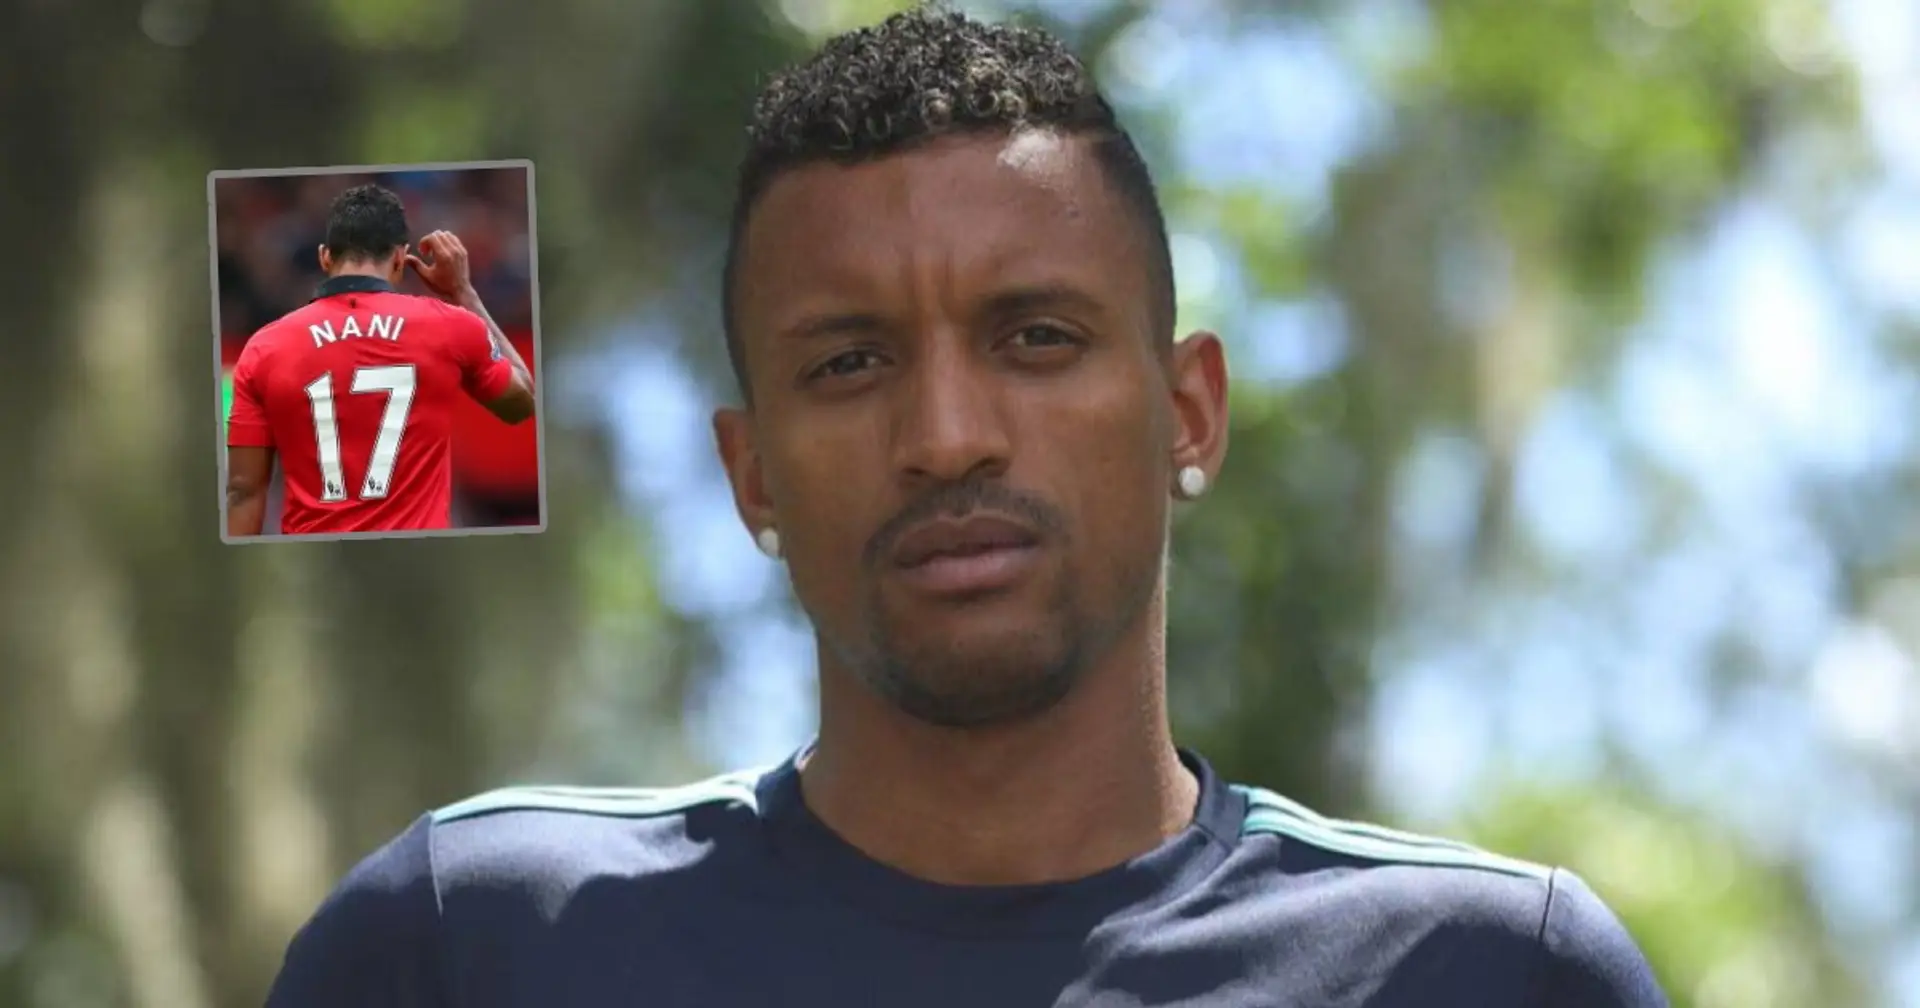 Nani sees himself in Man United youngster & 2 other under-radar stories today